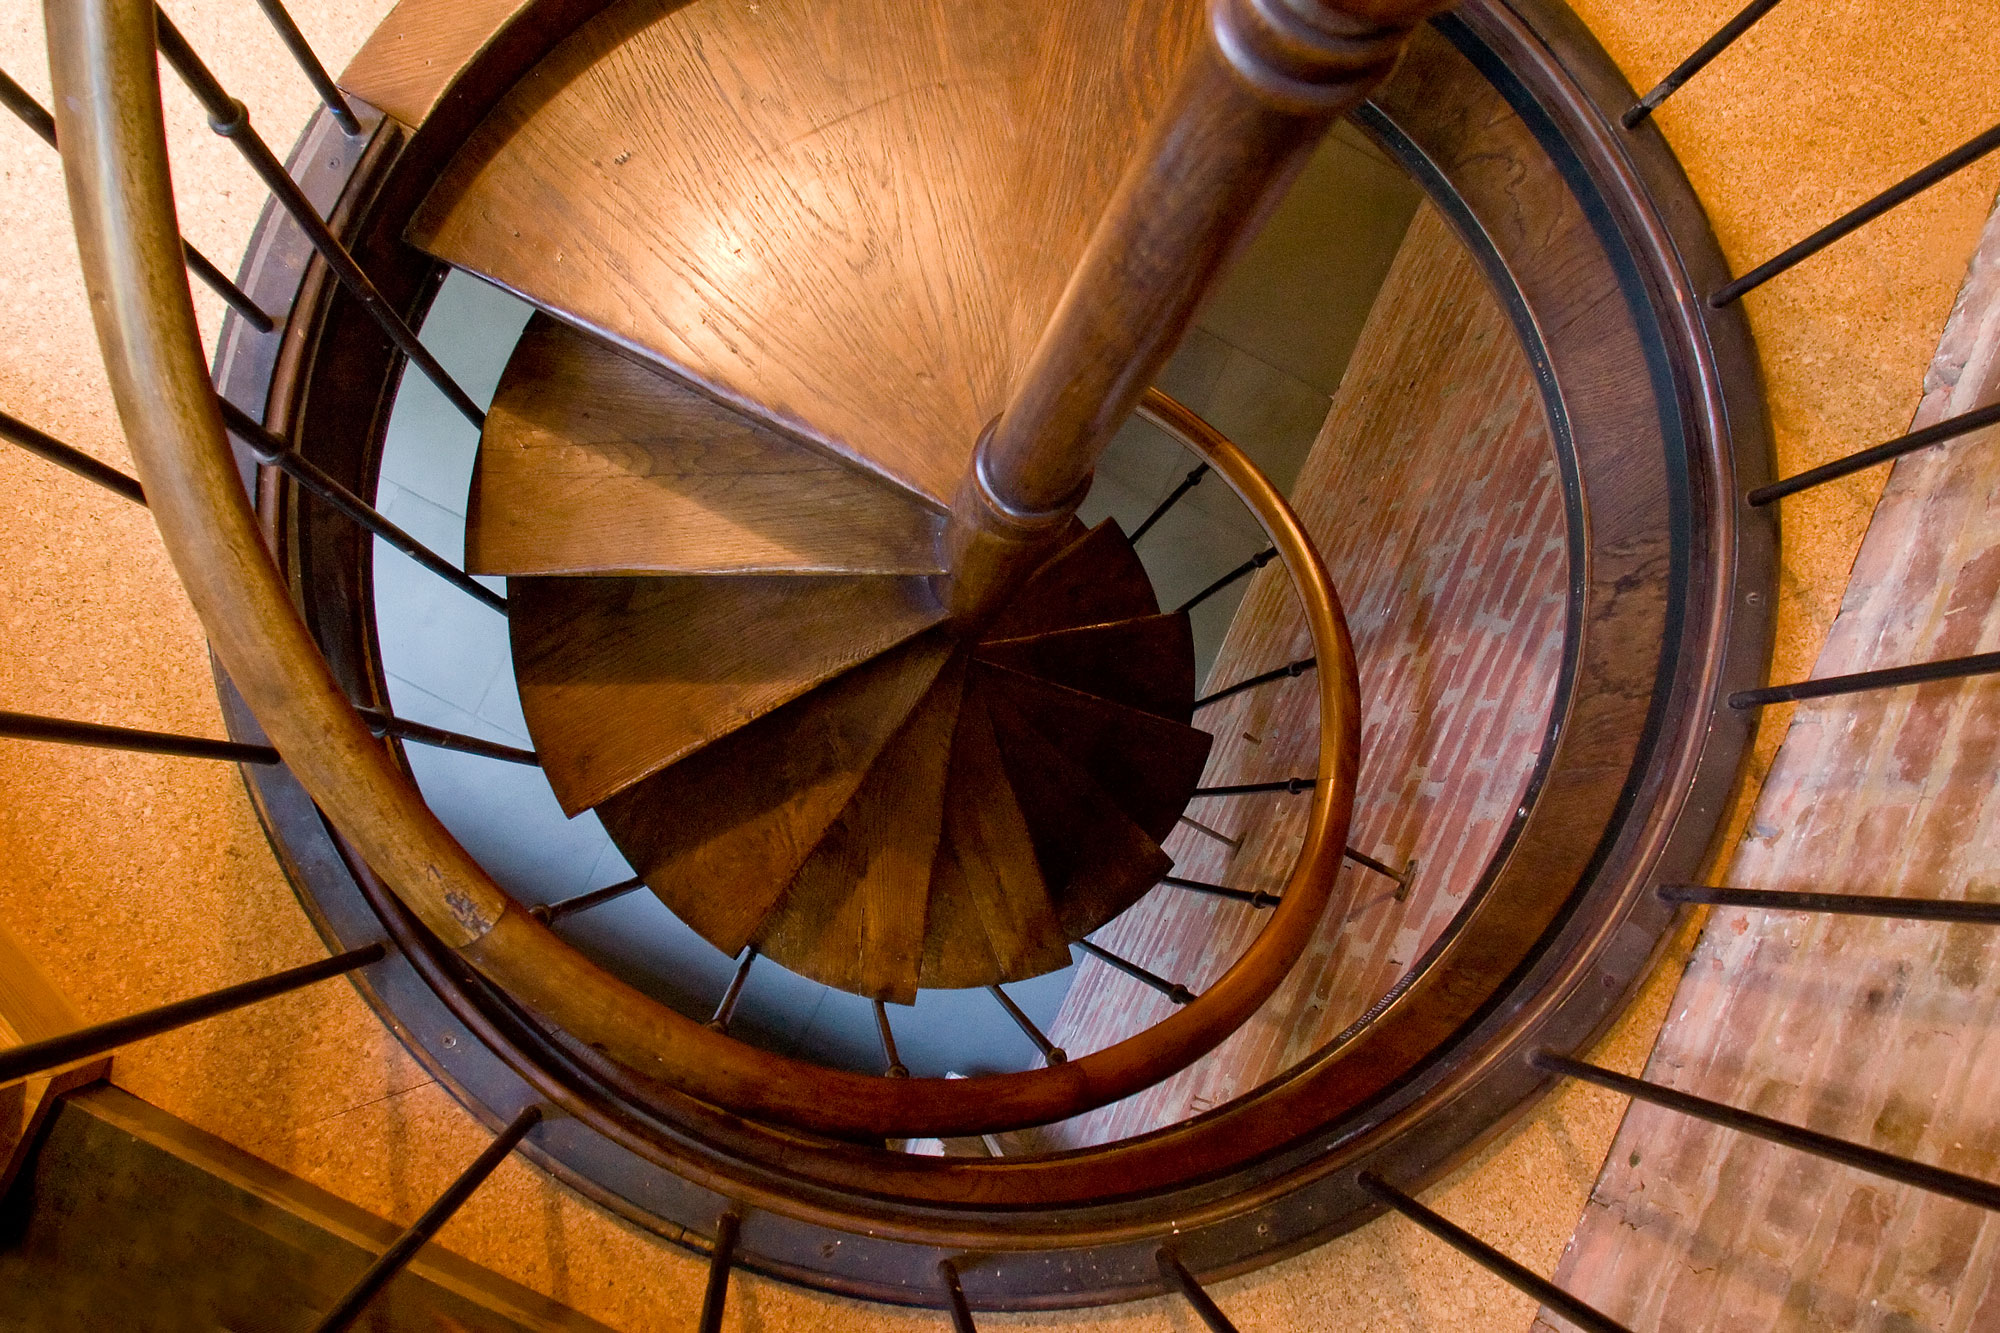 West Village Brownstone - Parlor Level Library Spiral Stair